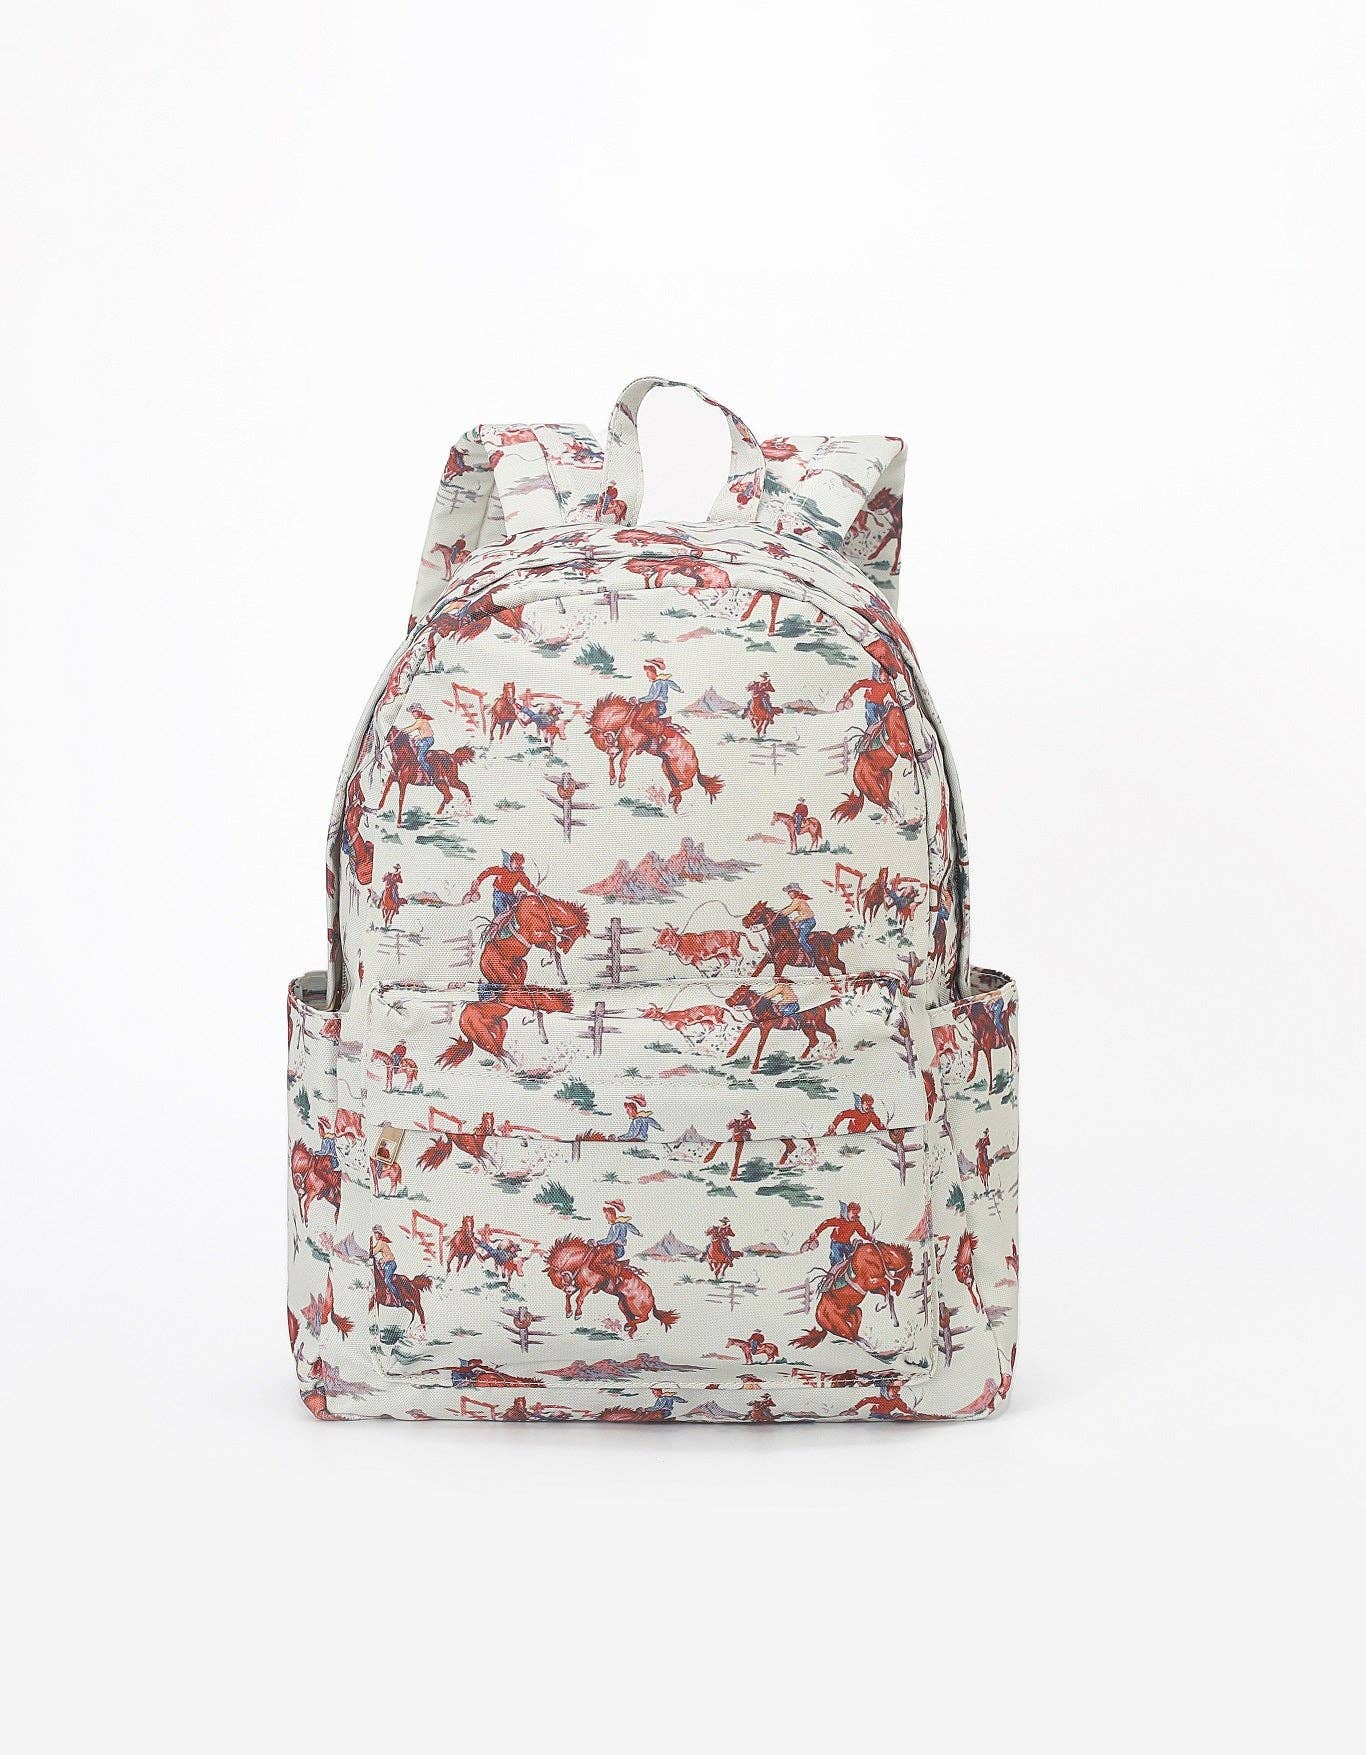 Sassy Kids Palace - Western Cowboy Hill Backpack For Kids